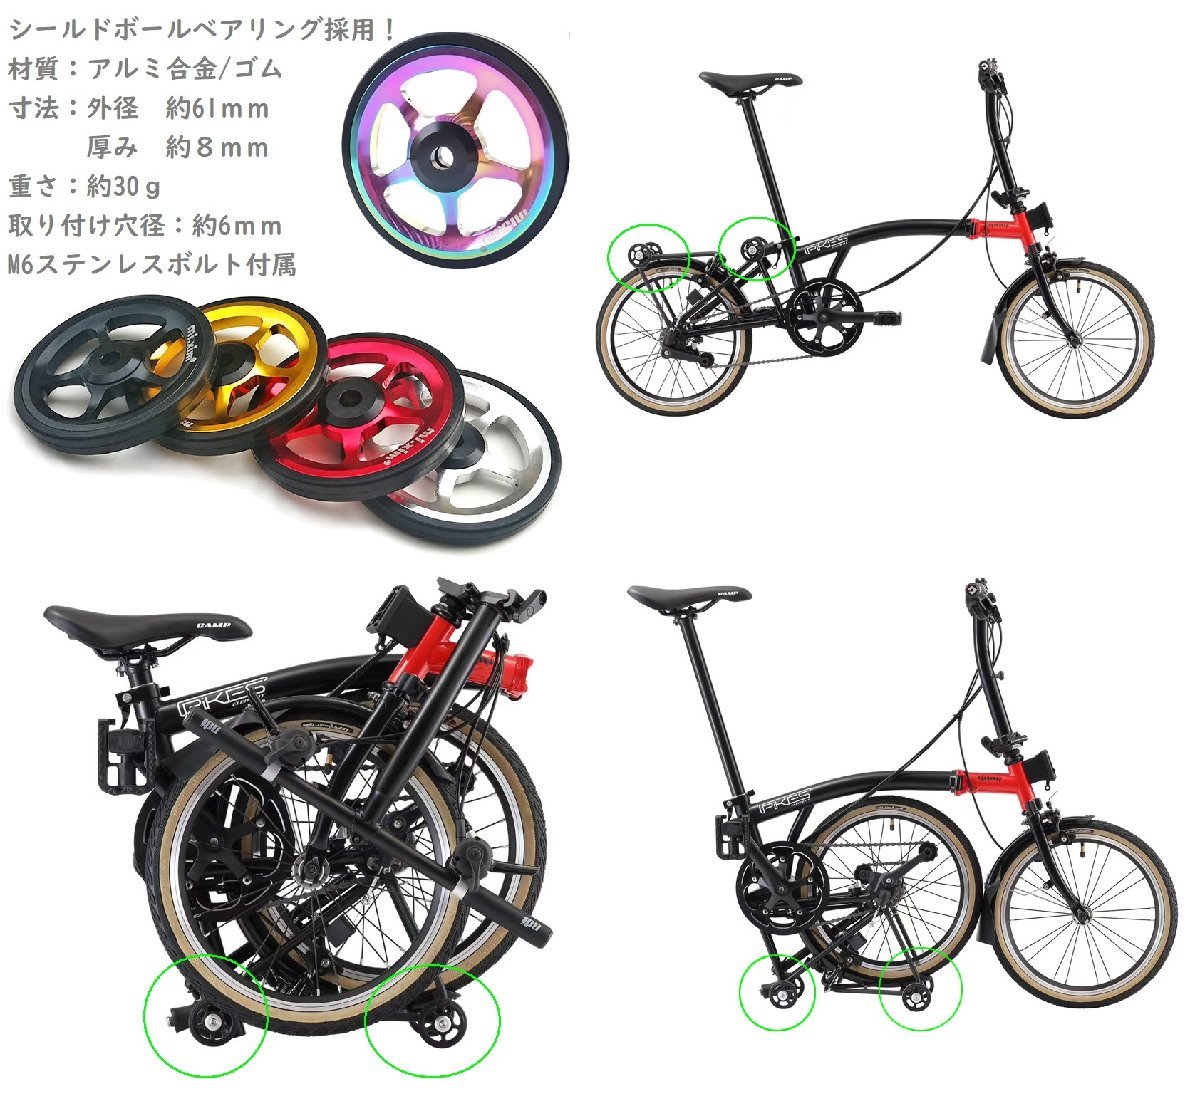 MicrOHERO foldable bicycle i-ji- wheel assistance wheel aluminium alloy light weight Easywheel For Brompton silver 1 piece 